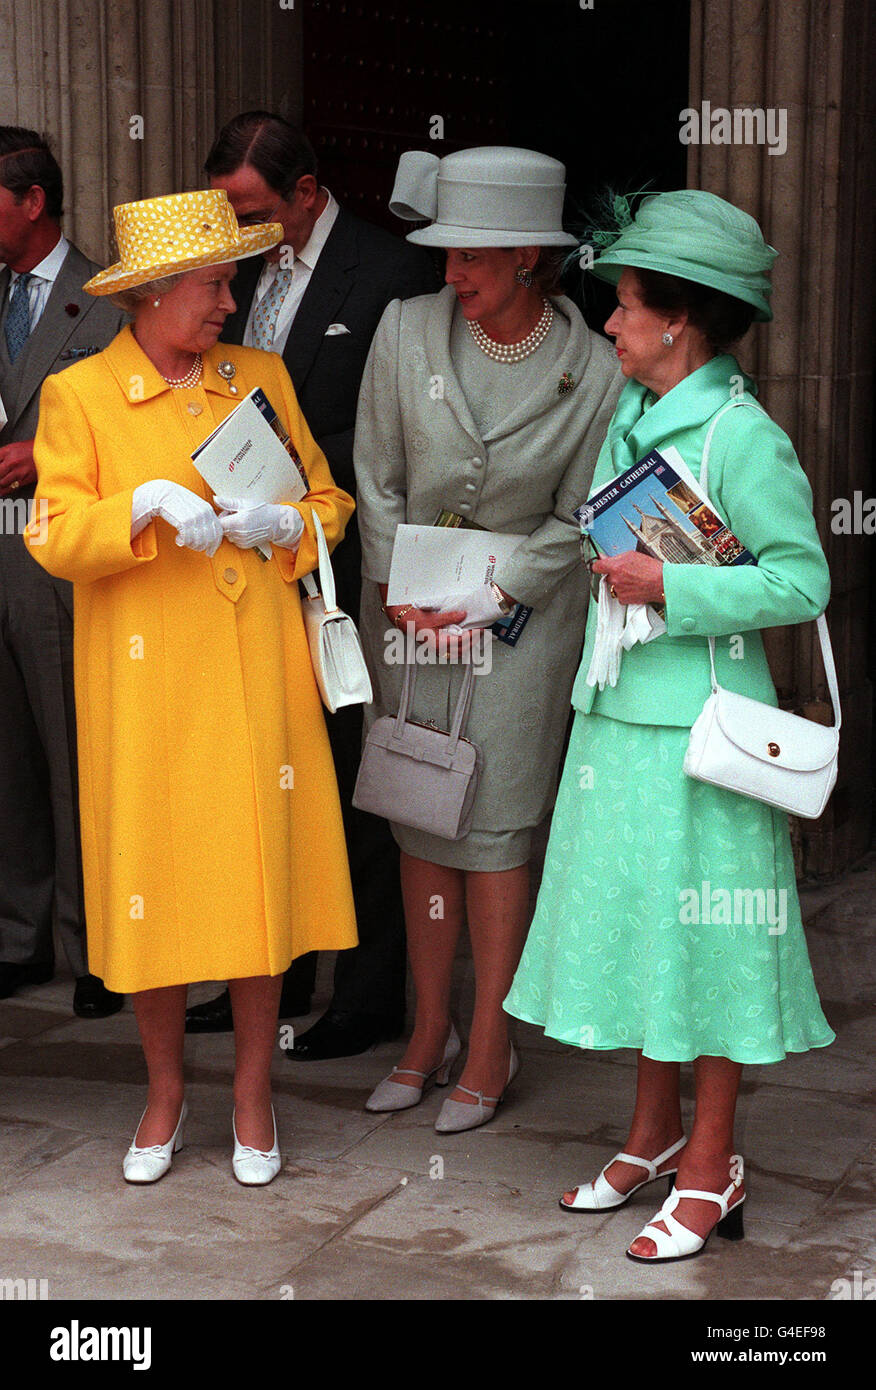 PA NEWS PHOTO 11/07/98 HER MAJESTY THE QUEEN (LEFT) AND HRH PRINCESS MARGARET (RIGHT) TALK TO QUEEN ANNA MARIA OF GREECE AT THE MARRIAGE BETWEEN THE LATE EARL LOUIS MOUNTBATTENS'S GRANDSON, TIMOTHY KNATCHBULL AND ISABELLA NORMAN AT WINCHESTER CATHEDRAL. Stock Photo